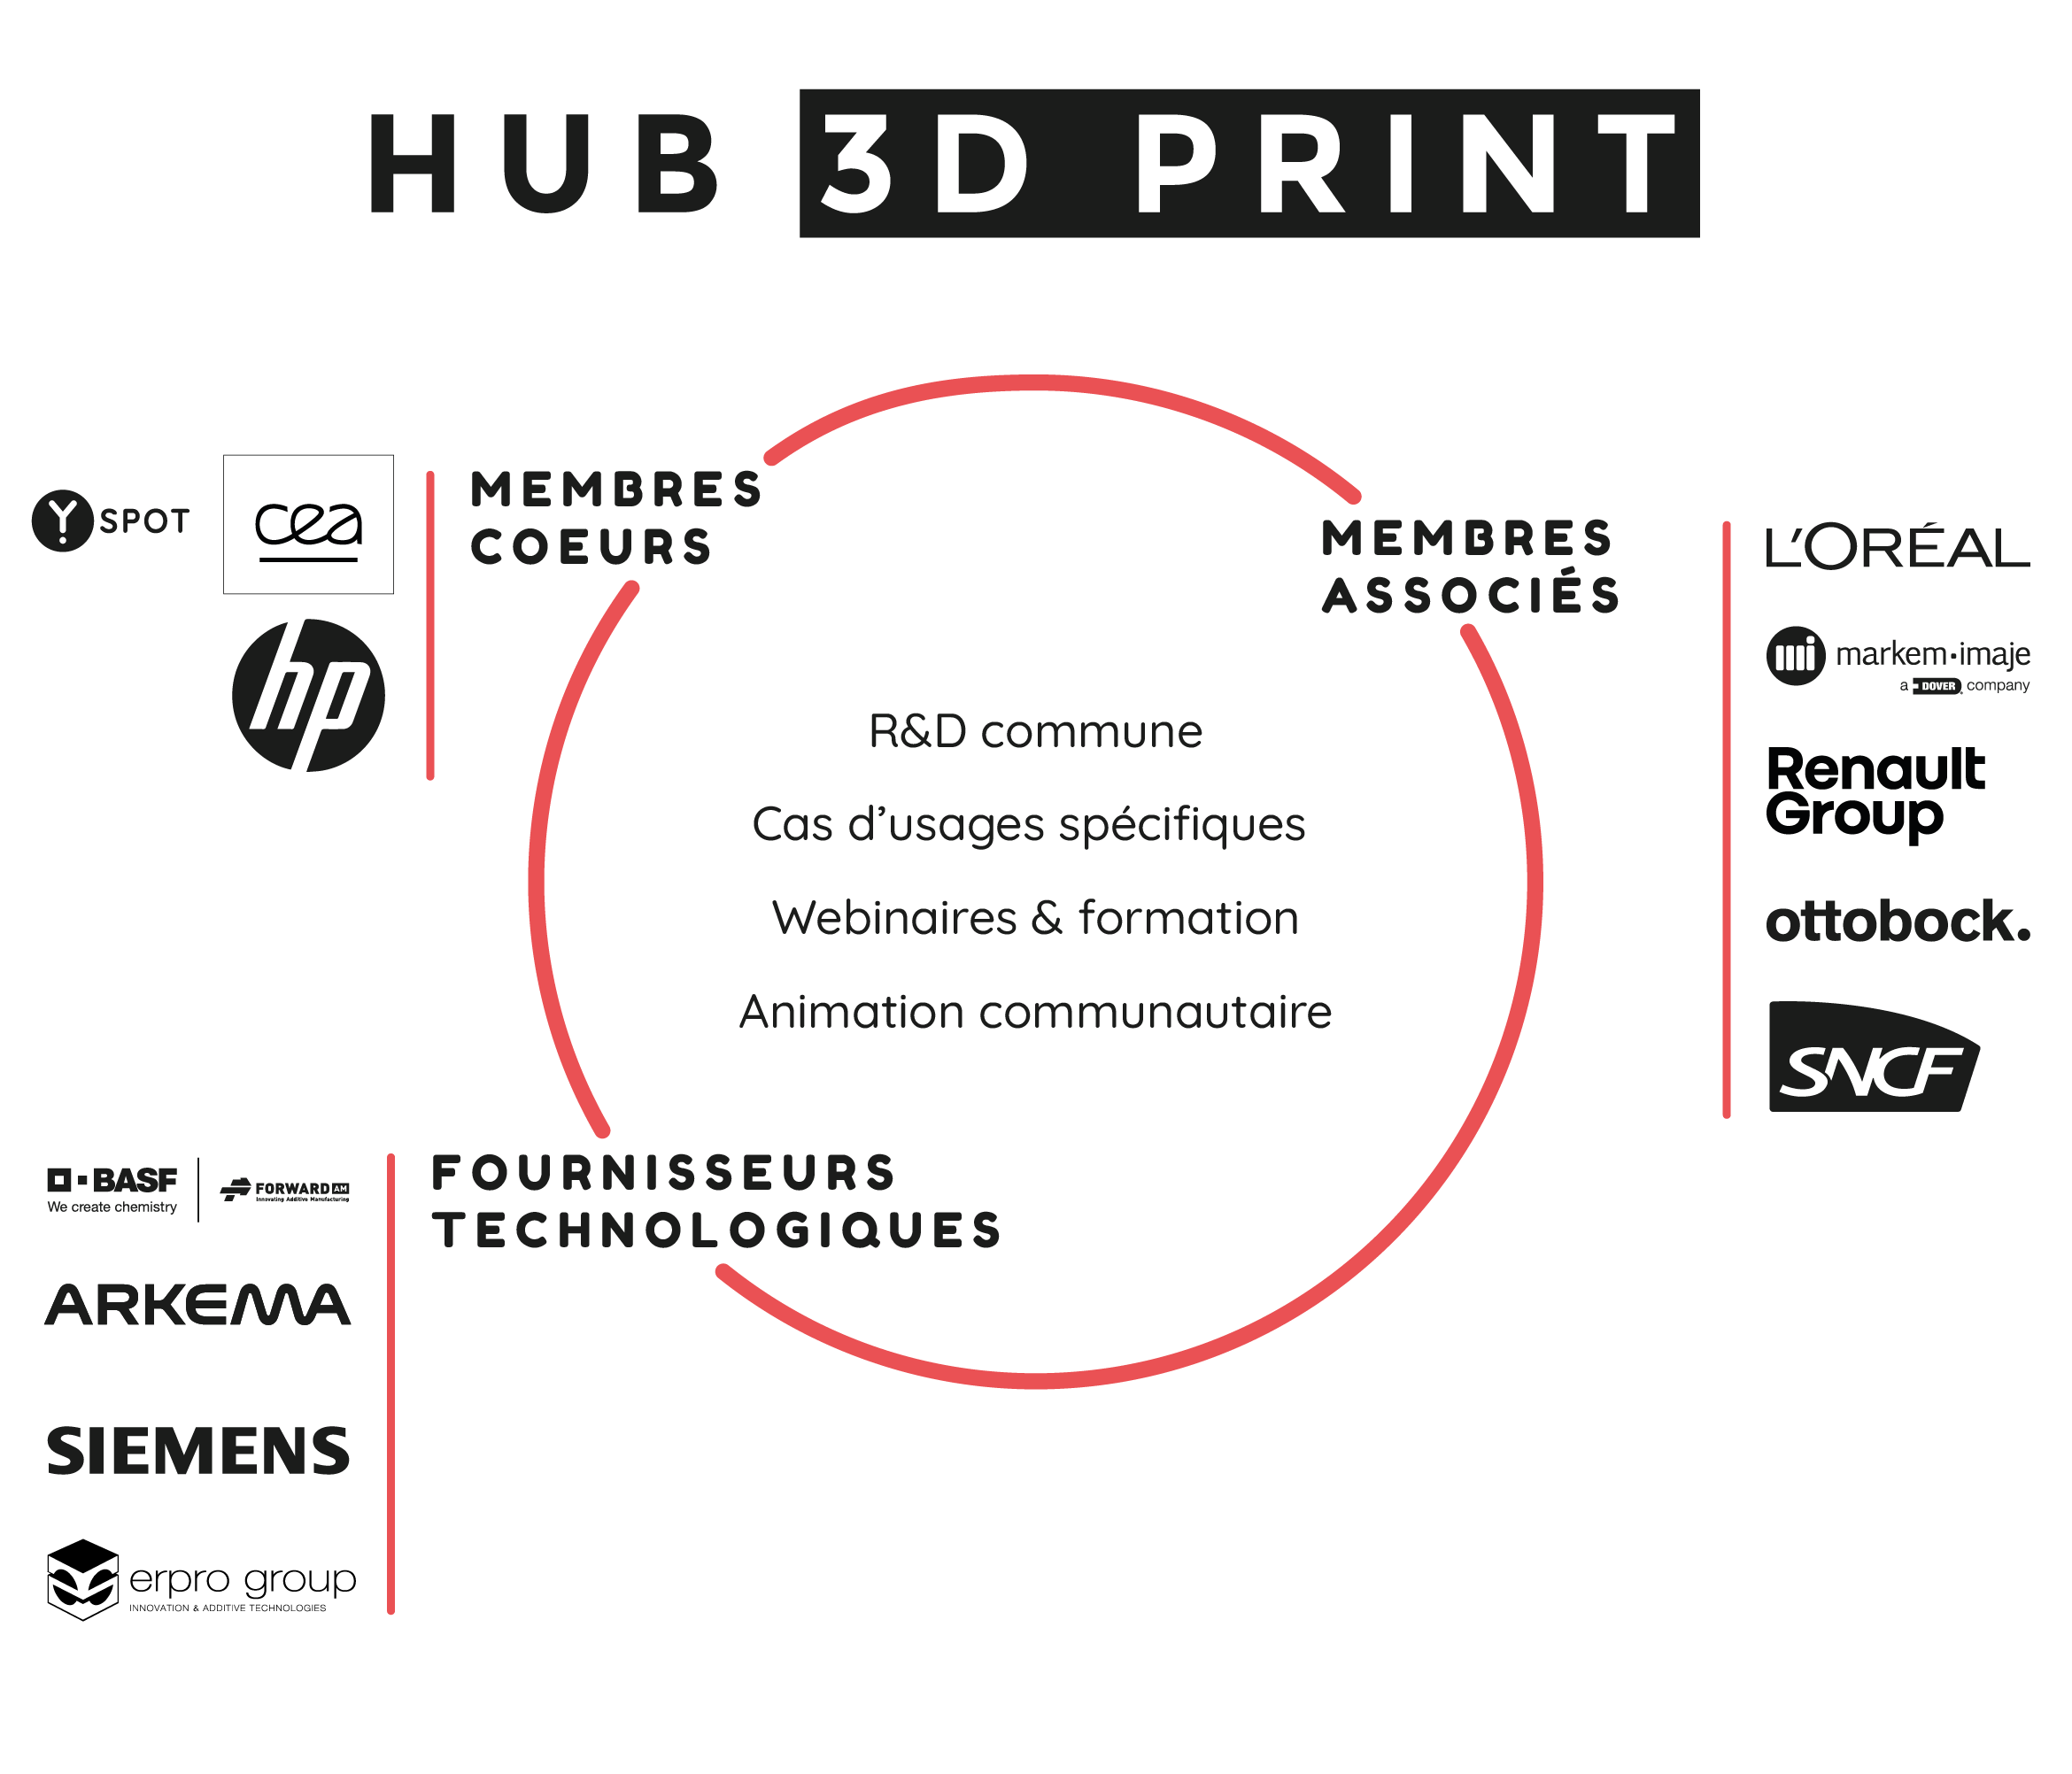 The 3D Print Hub includes core members (CEA Y. SPOT and HP Inc.), associate members (L'Oréal, Markem-Imaj, Renault, Ottobock and SNCF) and technology suppliers (BASF, ARKEMA and Siemens). All these actors are grouped around a common R&D, specific use cases, wébinaires, training and community activities.